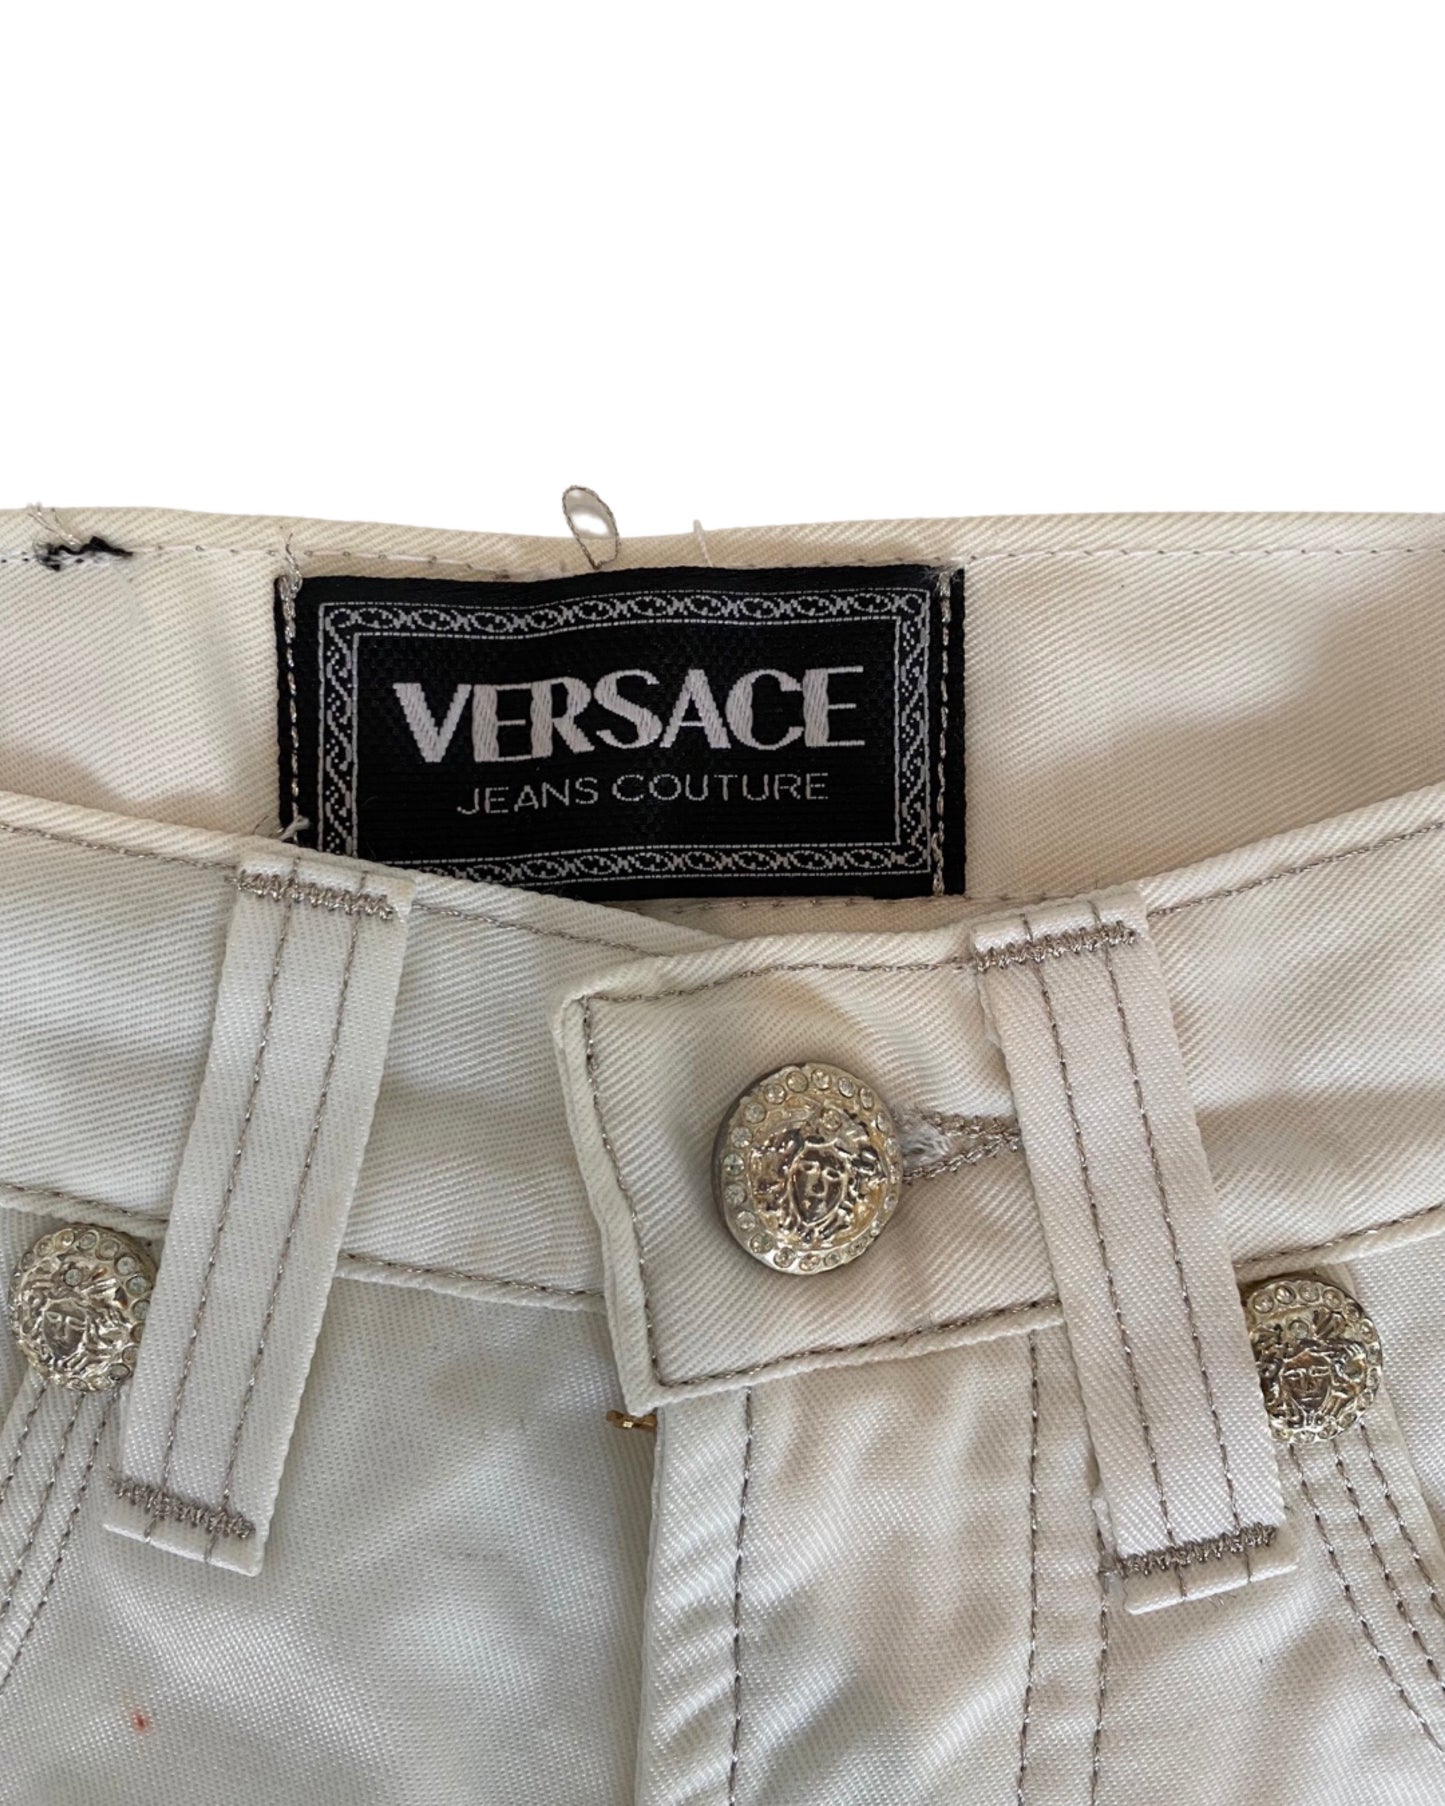 VERSACE JEANS COUTURE HIGH WAIST PANTS